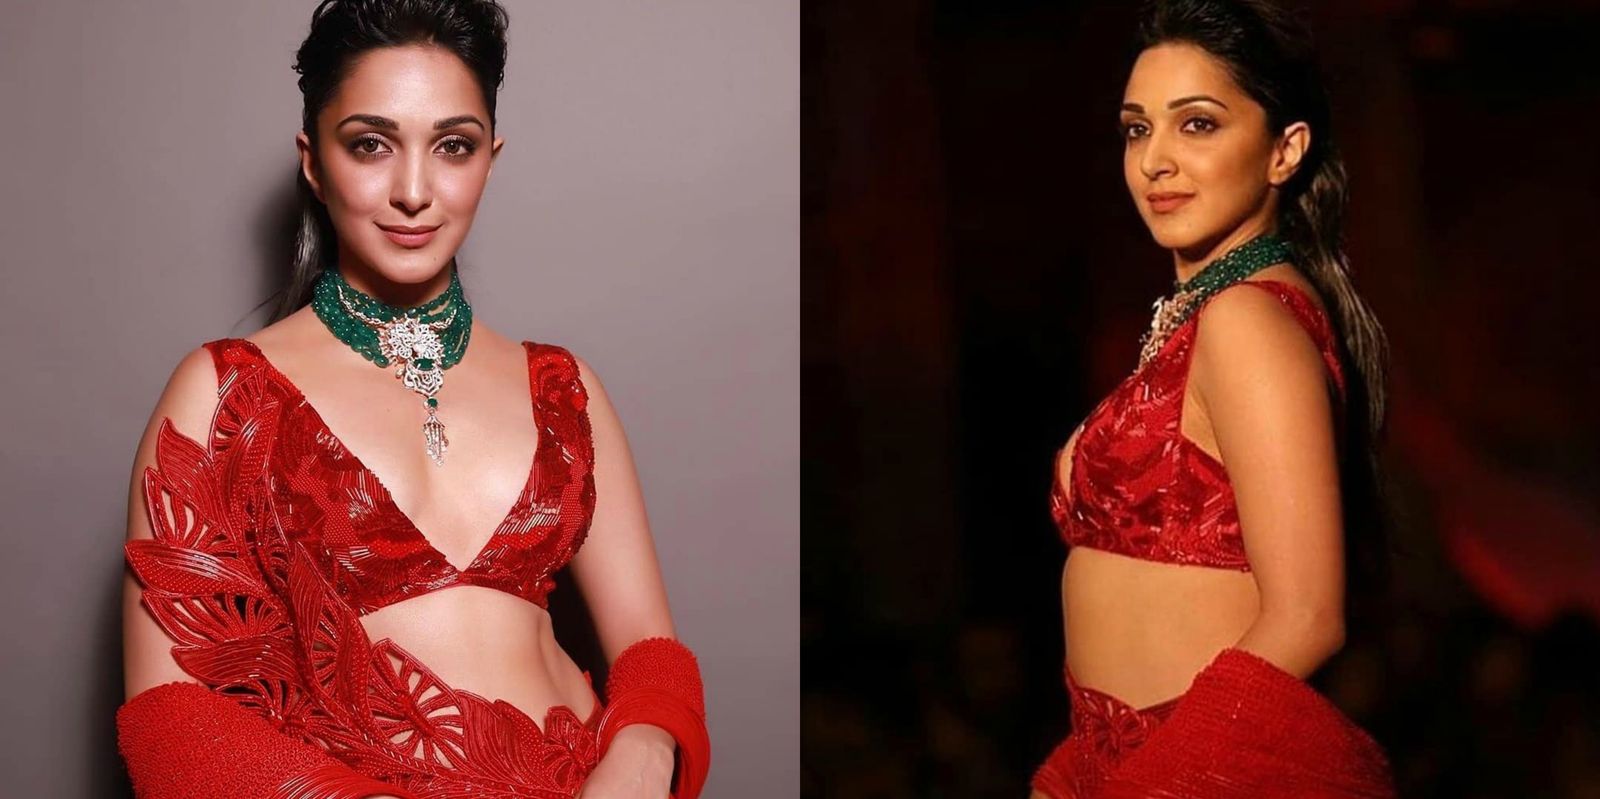 Kiara Advani Looks Stunning In Red As She Takes Over The Ramp At The India Couture Week For Amit Aggarwal